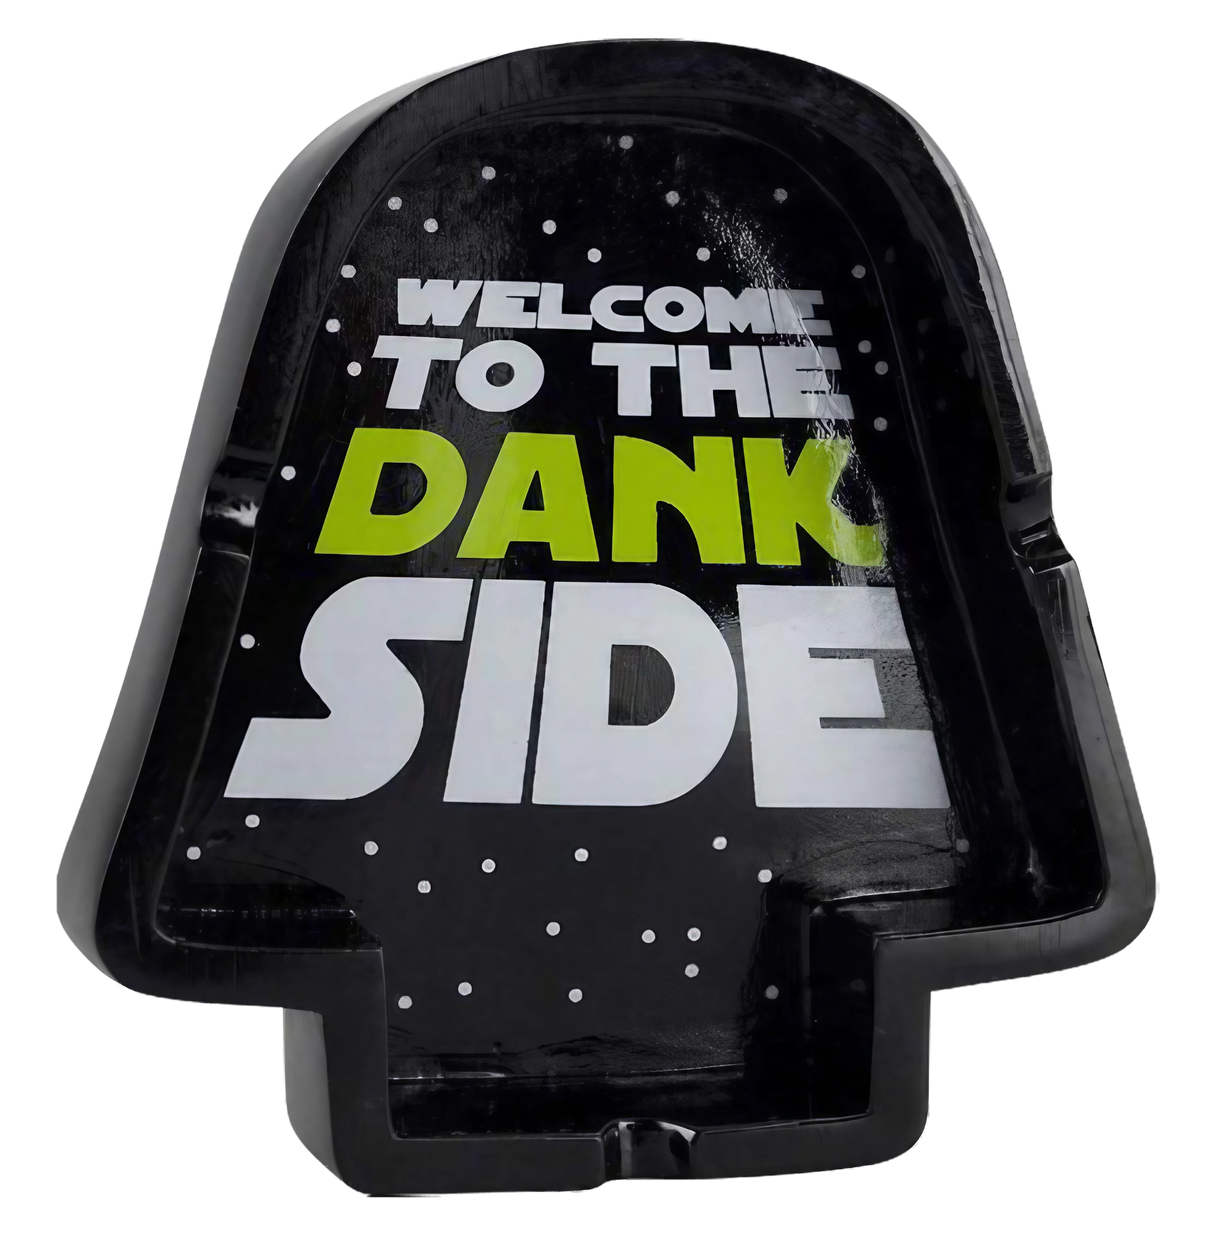 Black polyresin 'Welcome to the Dank Side' ashtray, front view, 4.15" x 4.35" size